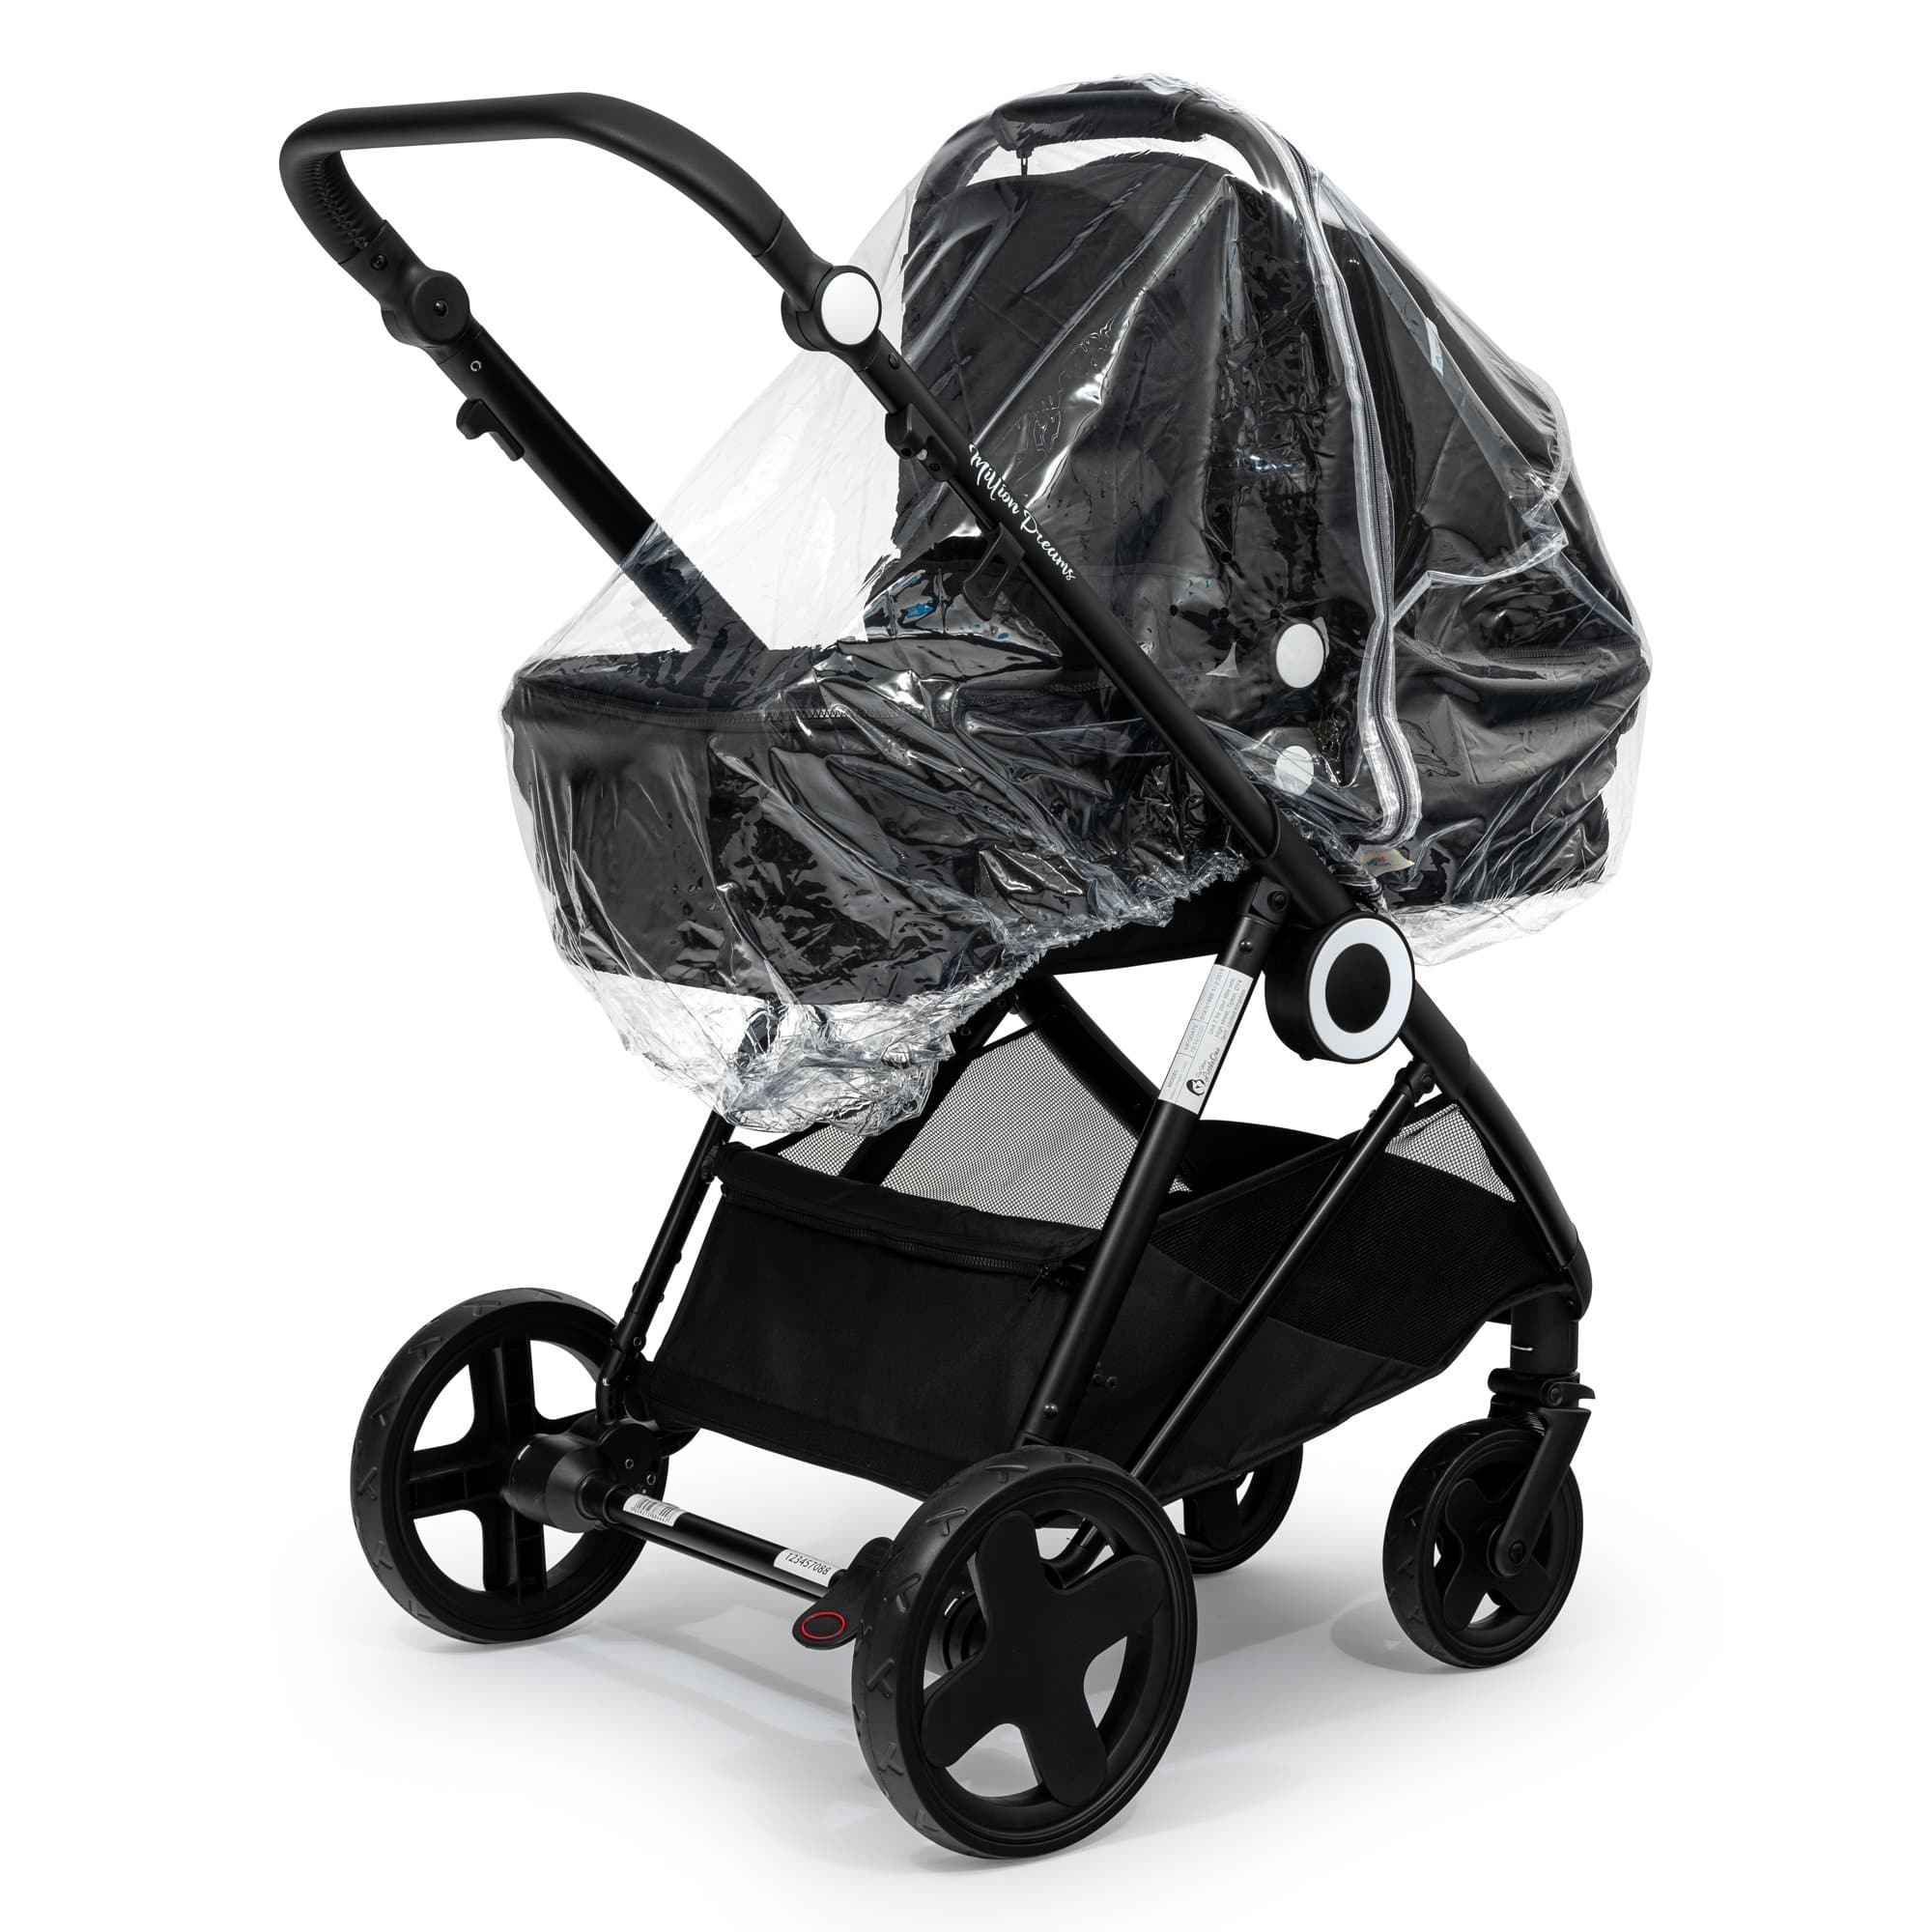 2 in 1 Rain Cover Compatible with Nuna - Fits All Models - For Your Little One